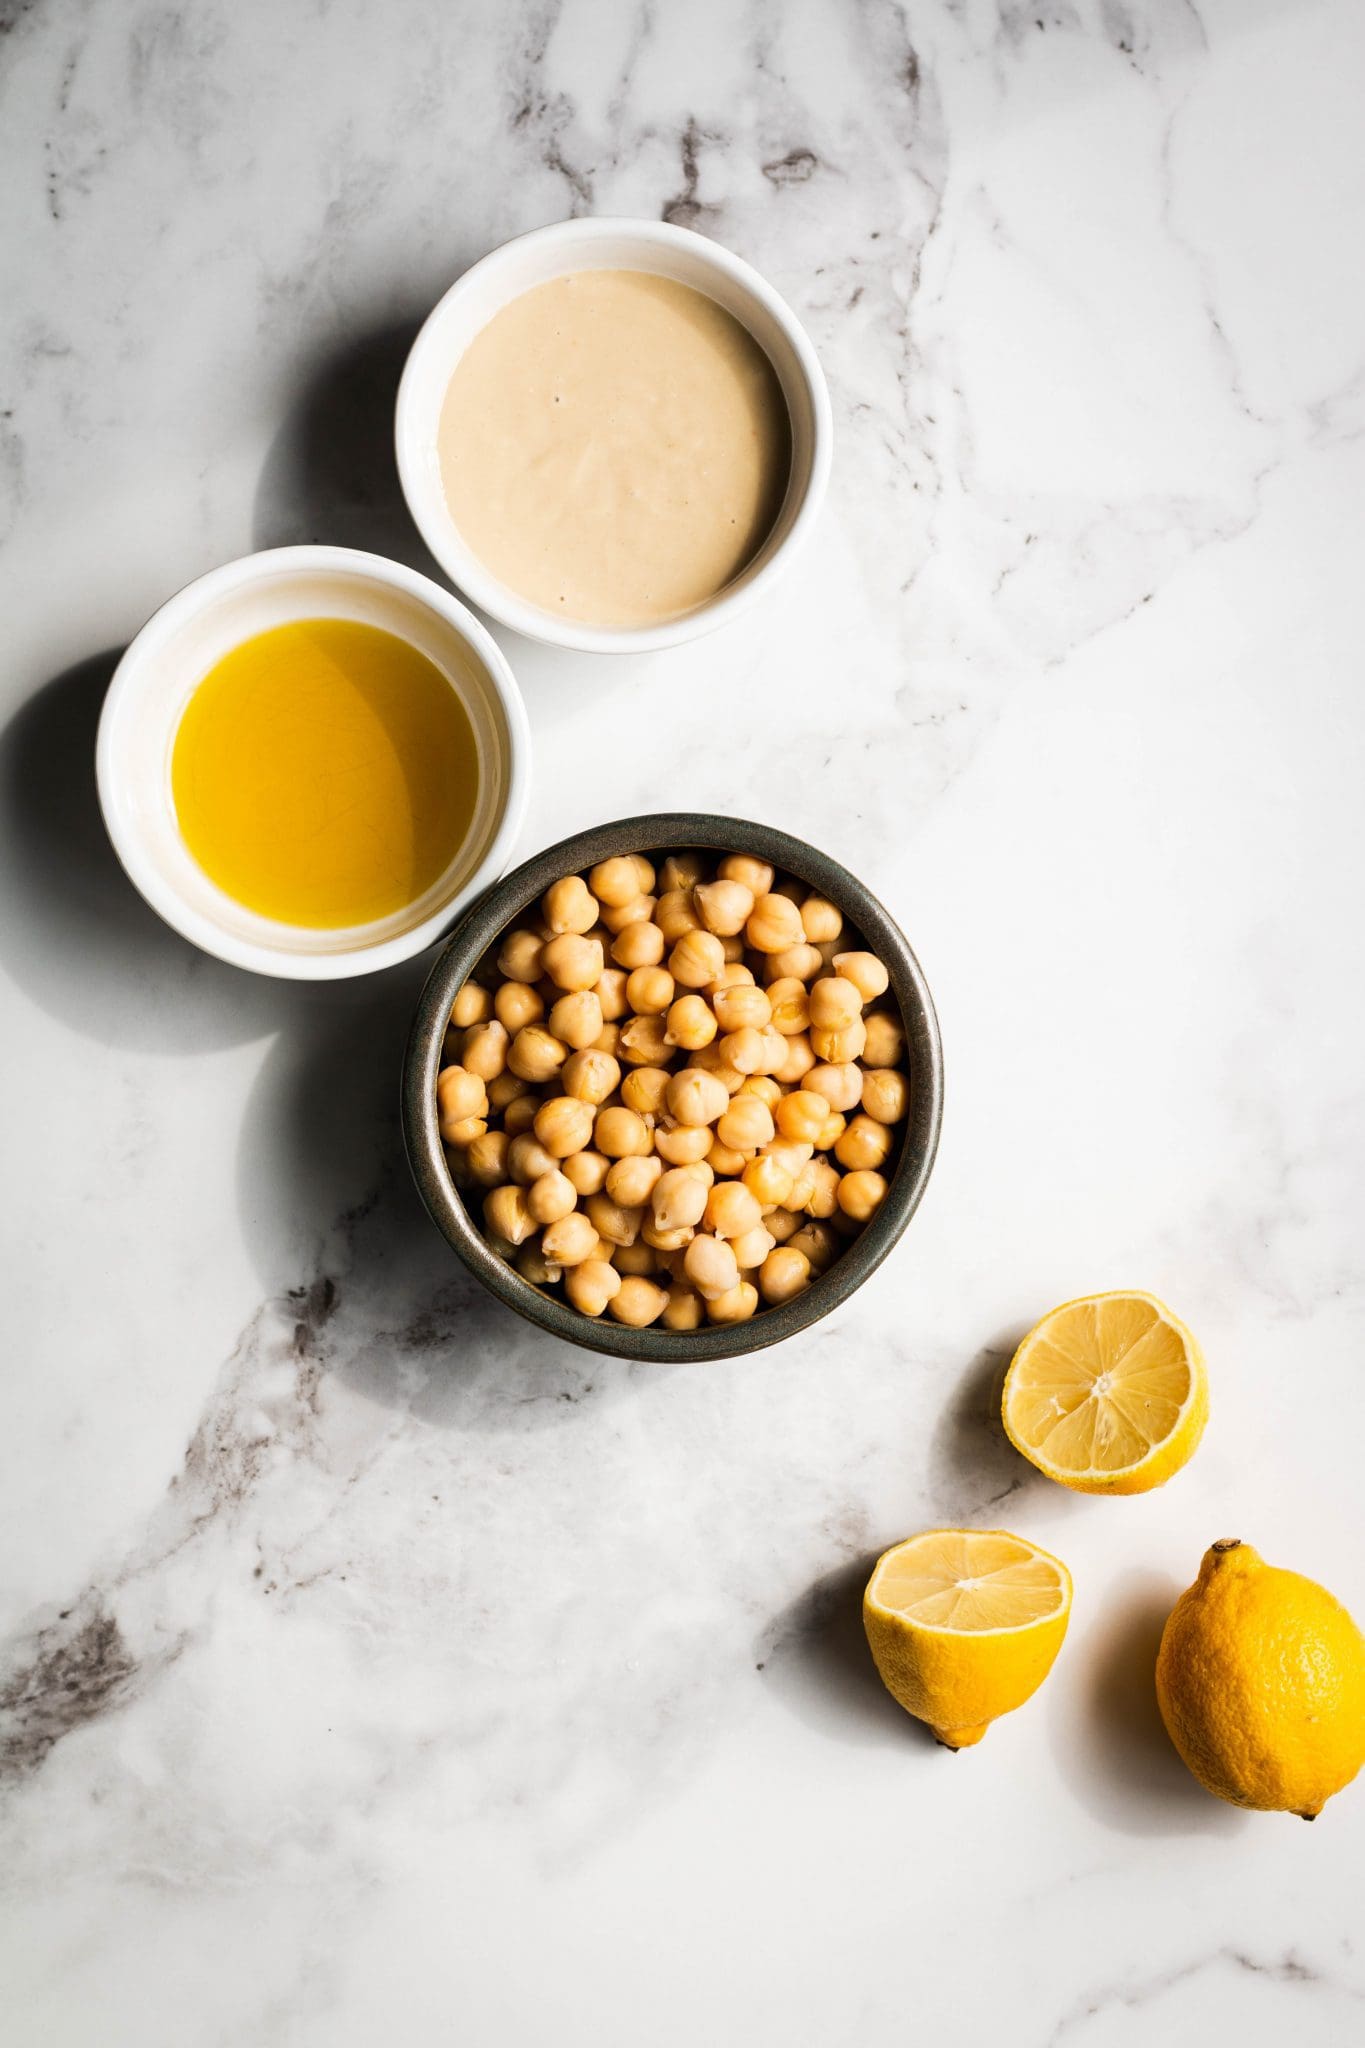 chickpeas, tahini and oil in small bowls, plus lemons on the side